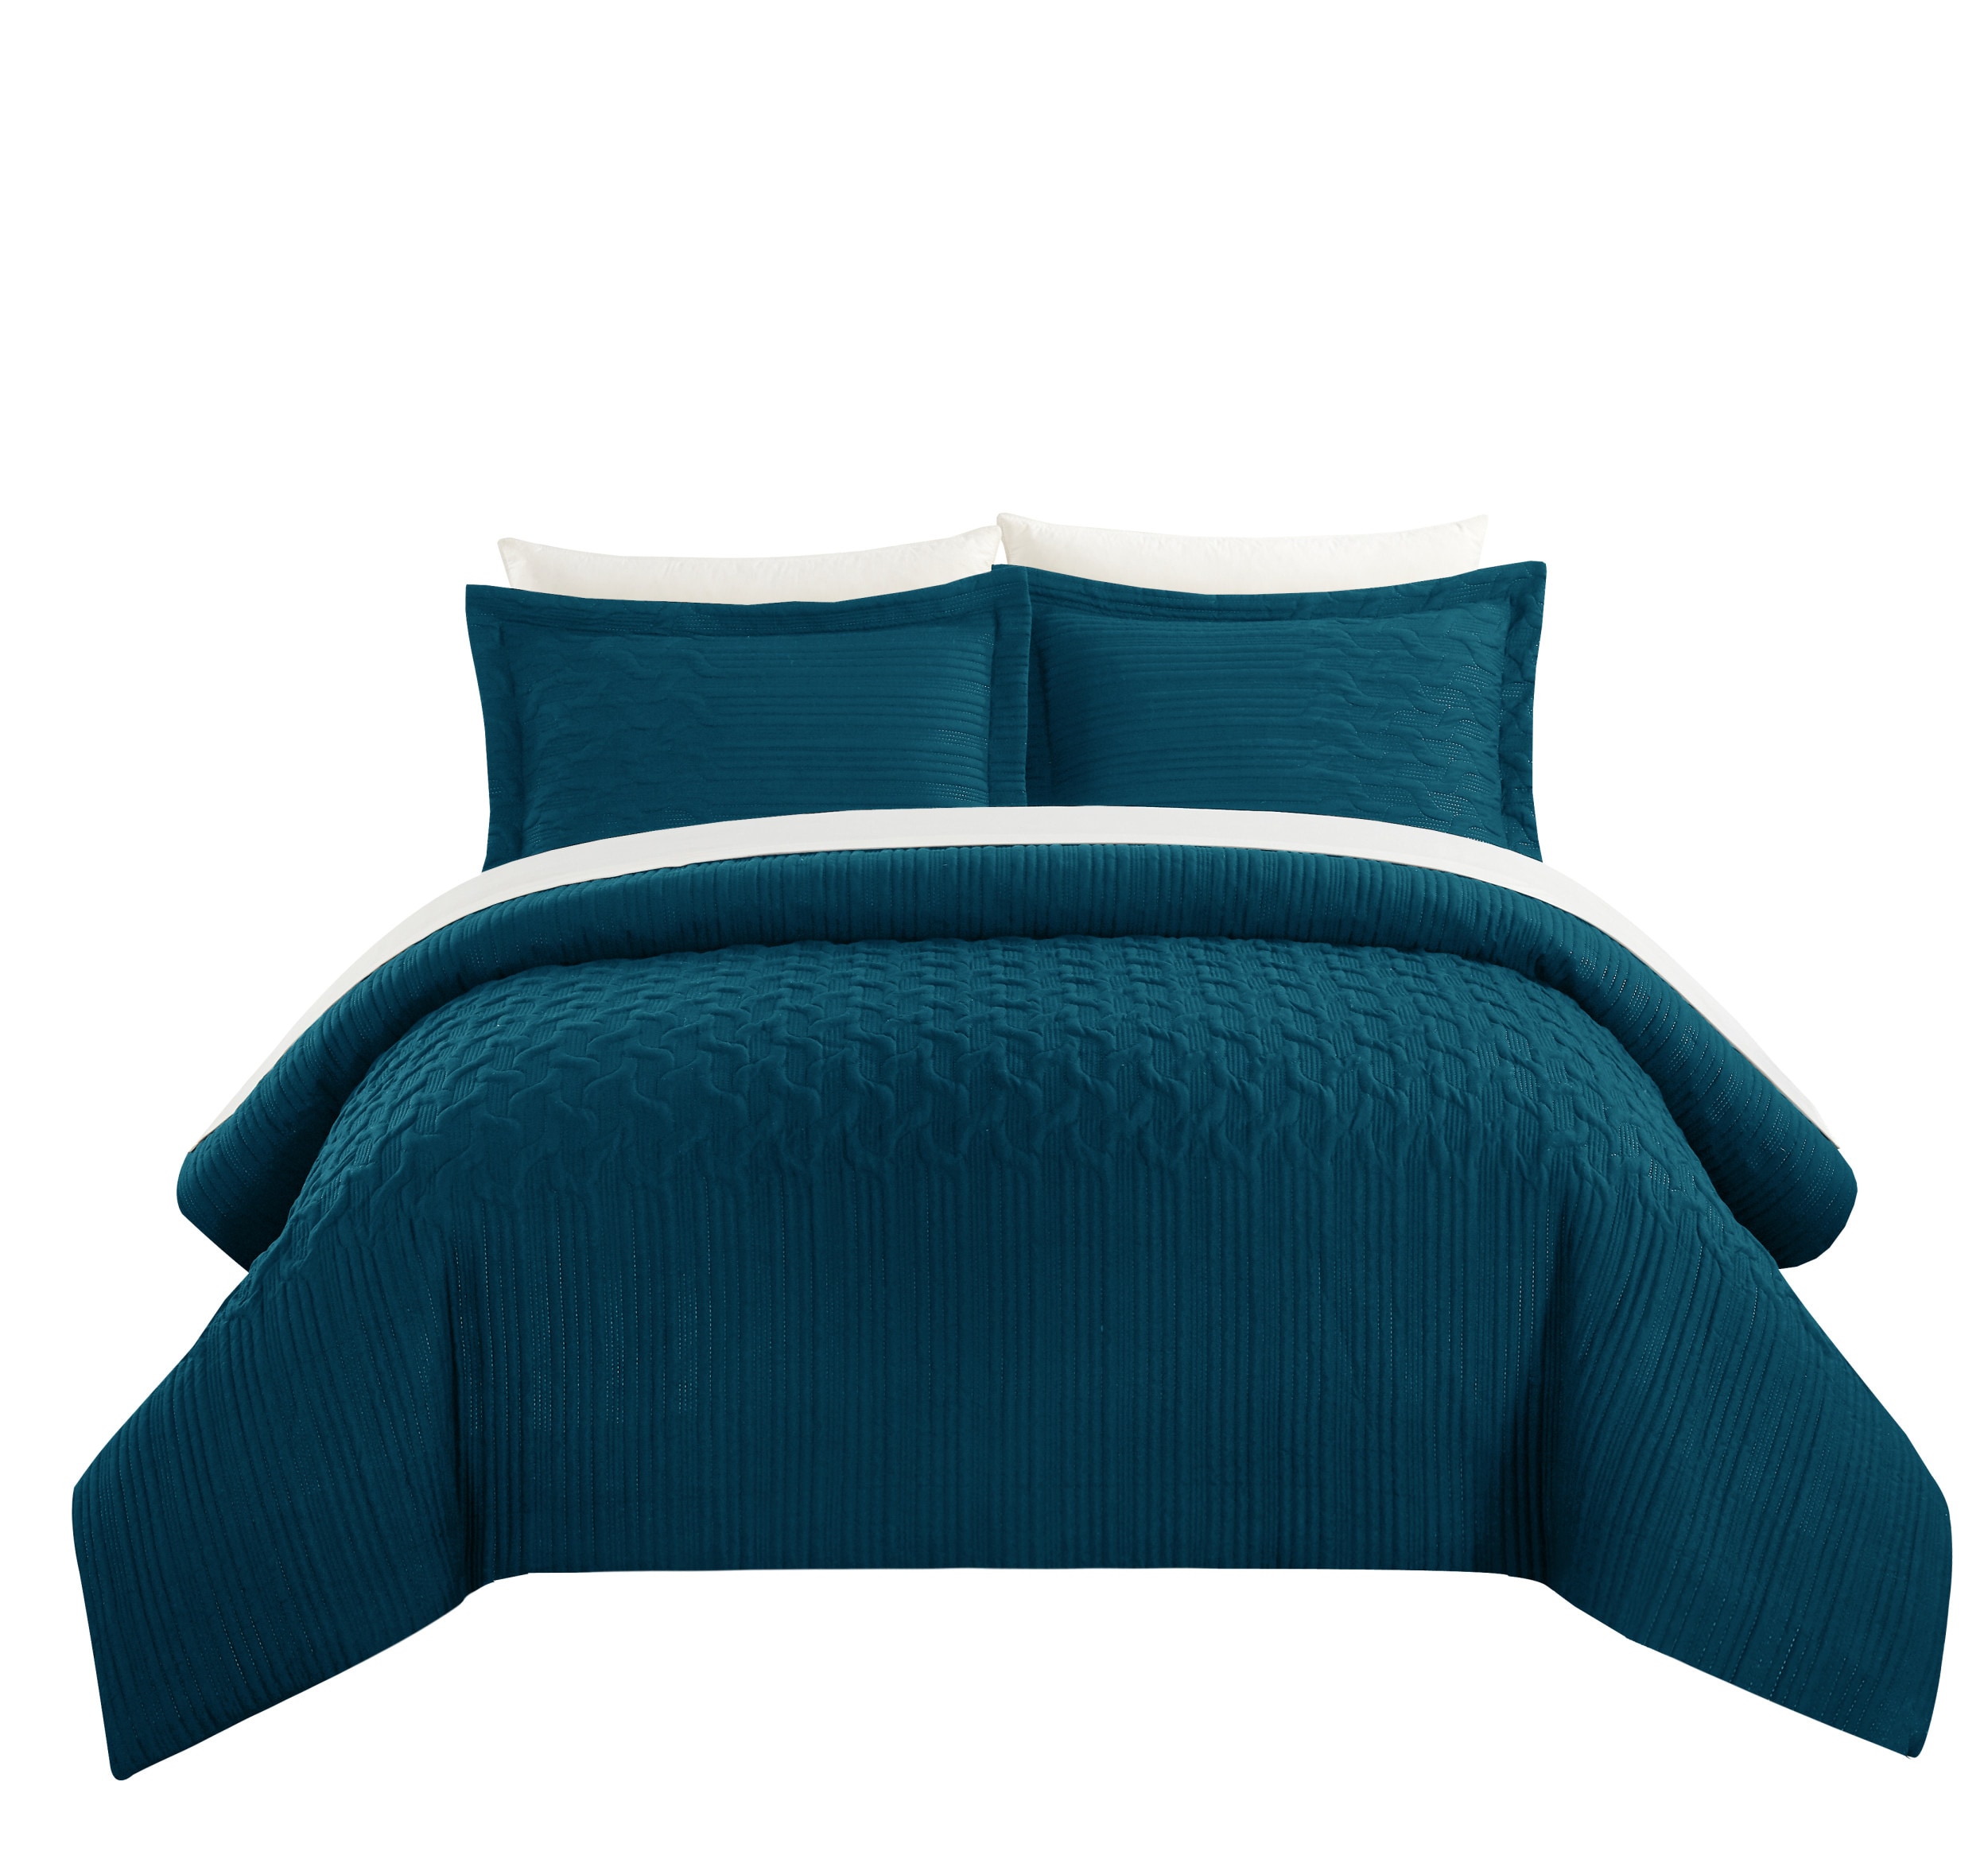 Comforter Set In The Bedding Sets, Teal Twin Bed Comforter